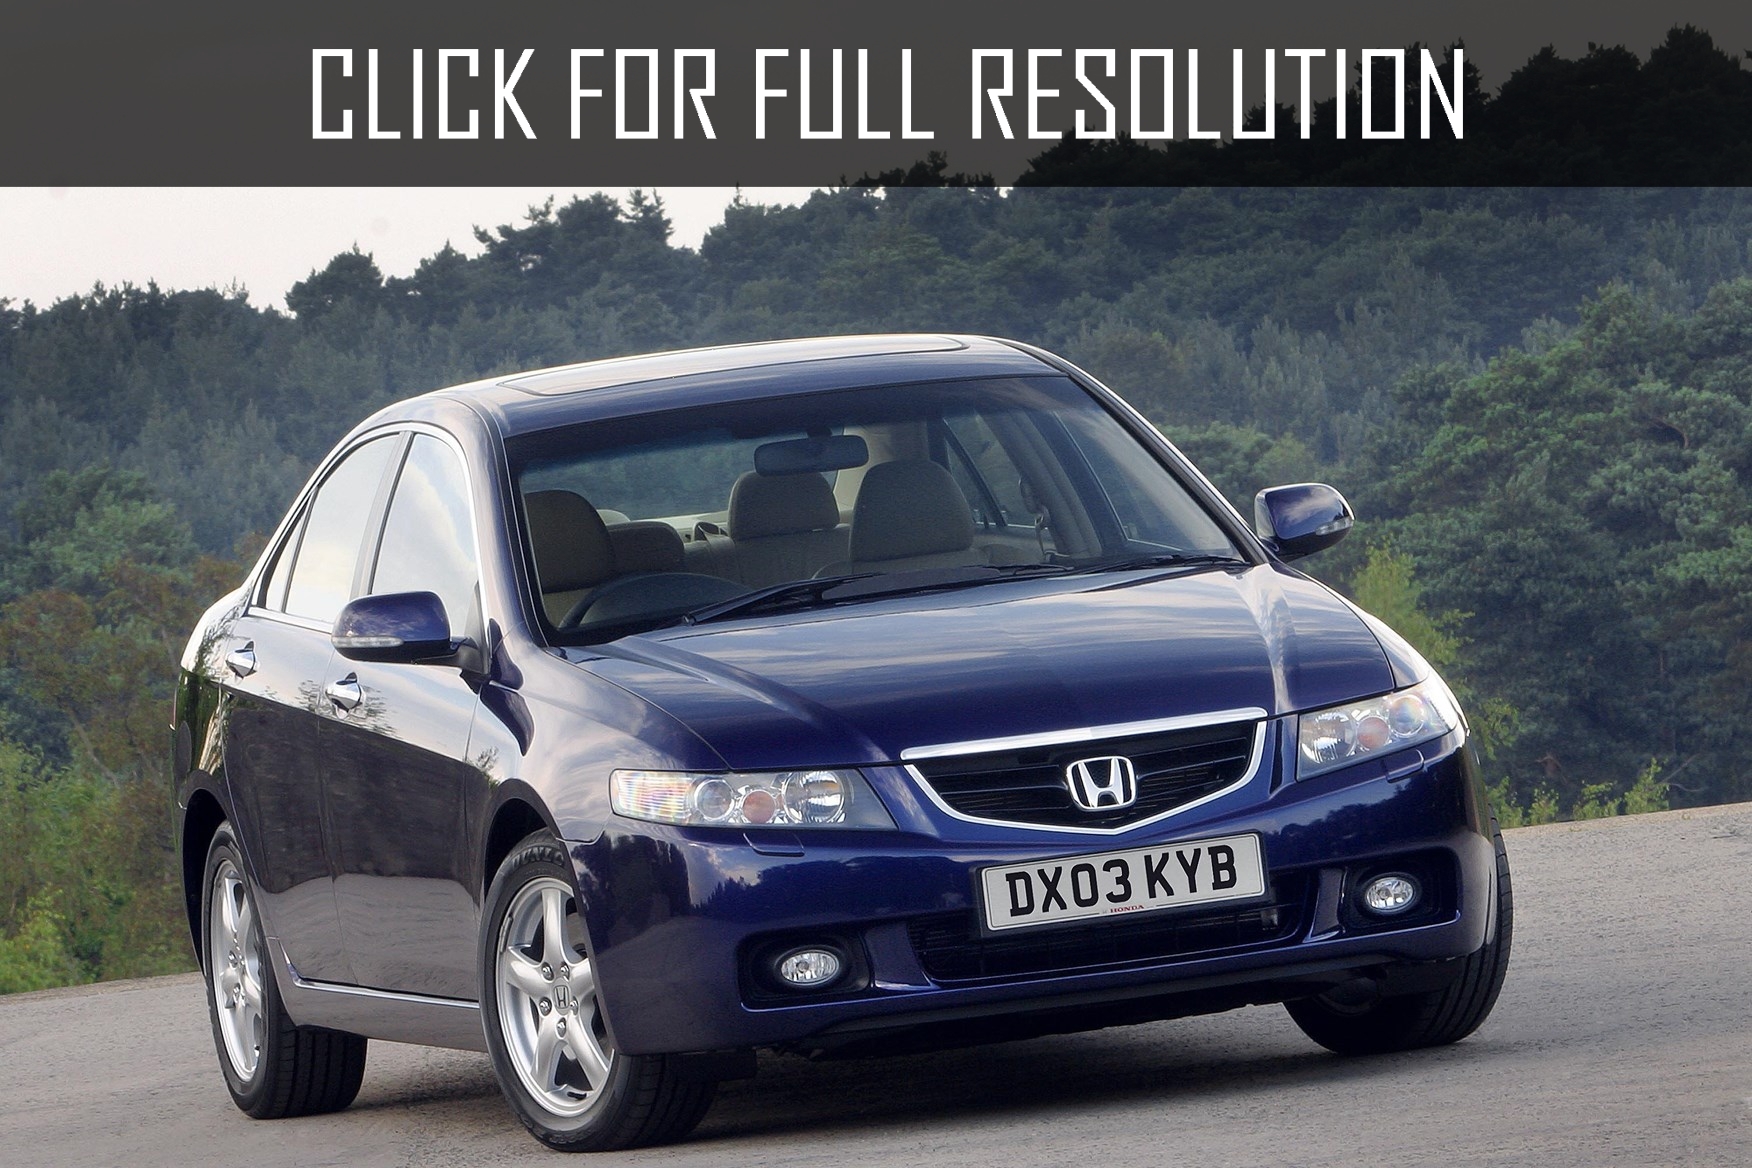 2004 Honda Accord - news, reviews, msrp, ratings with amazing images